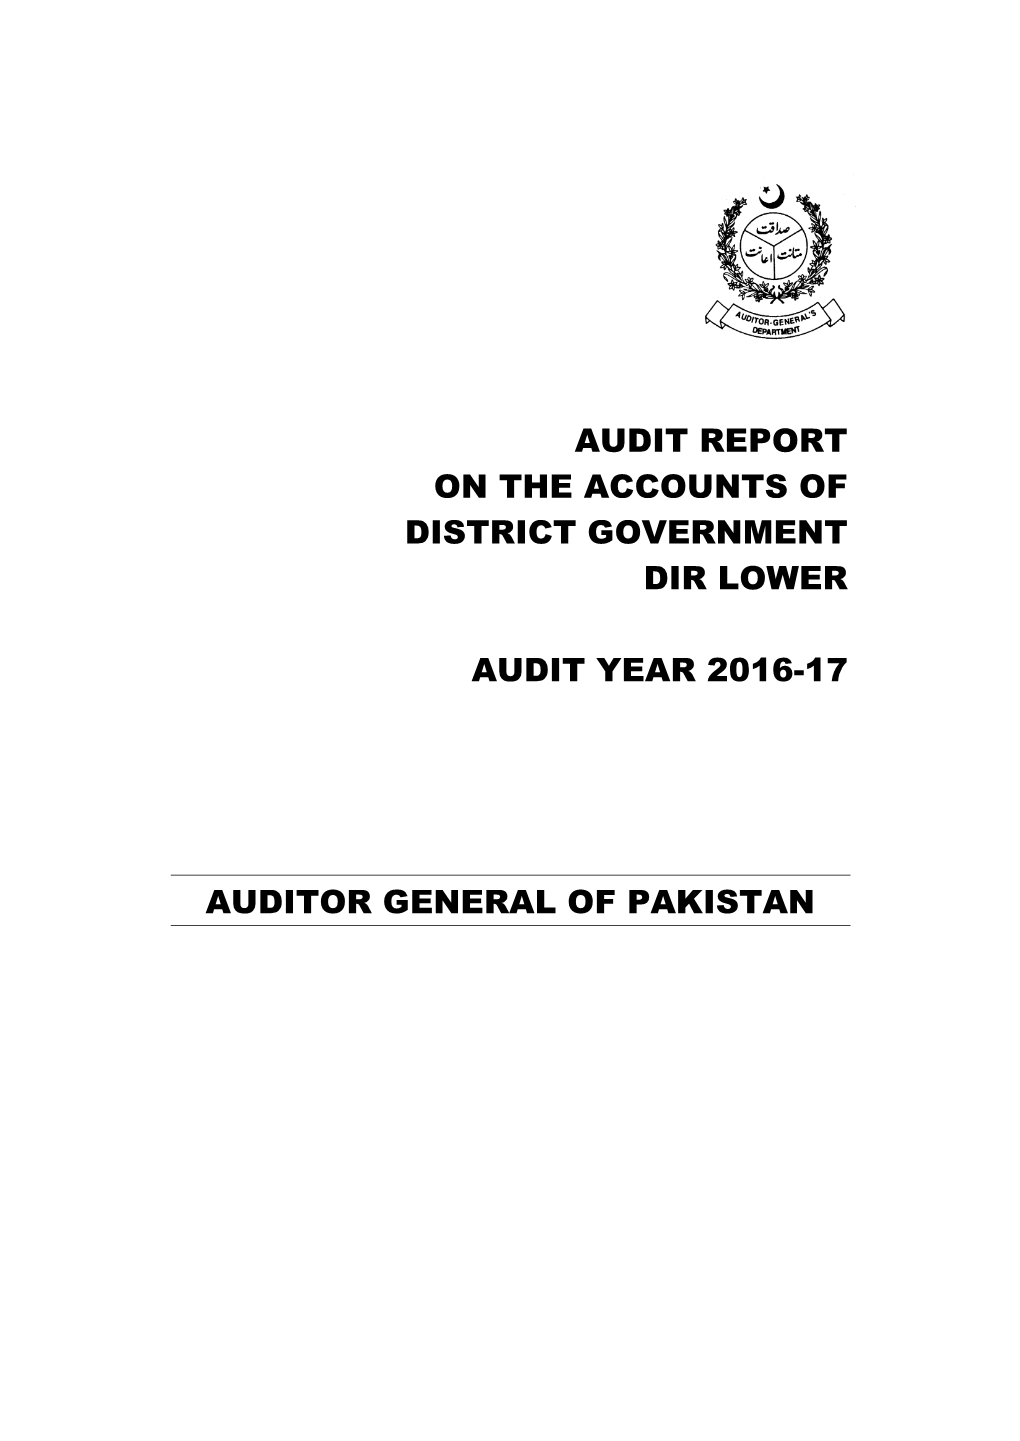 Audit Report on the Accounts of District Government Dir Lower Audit Year